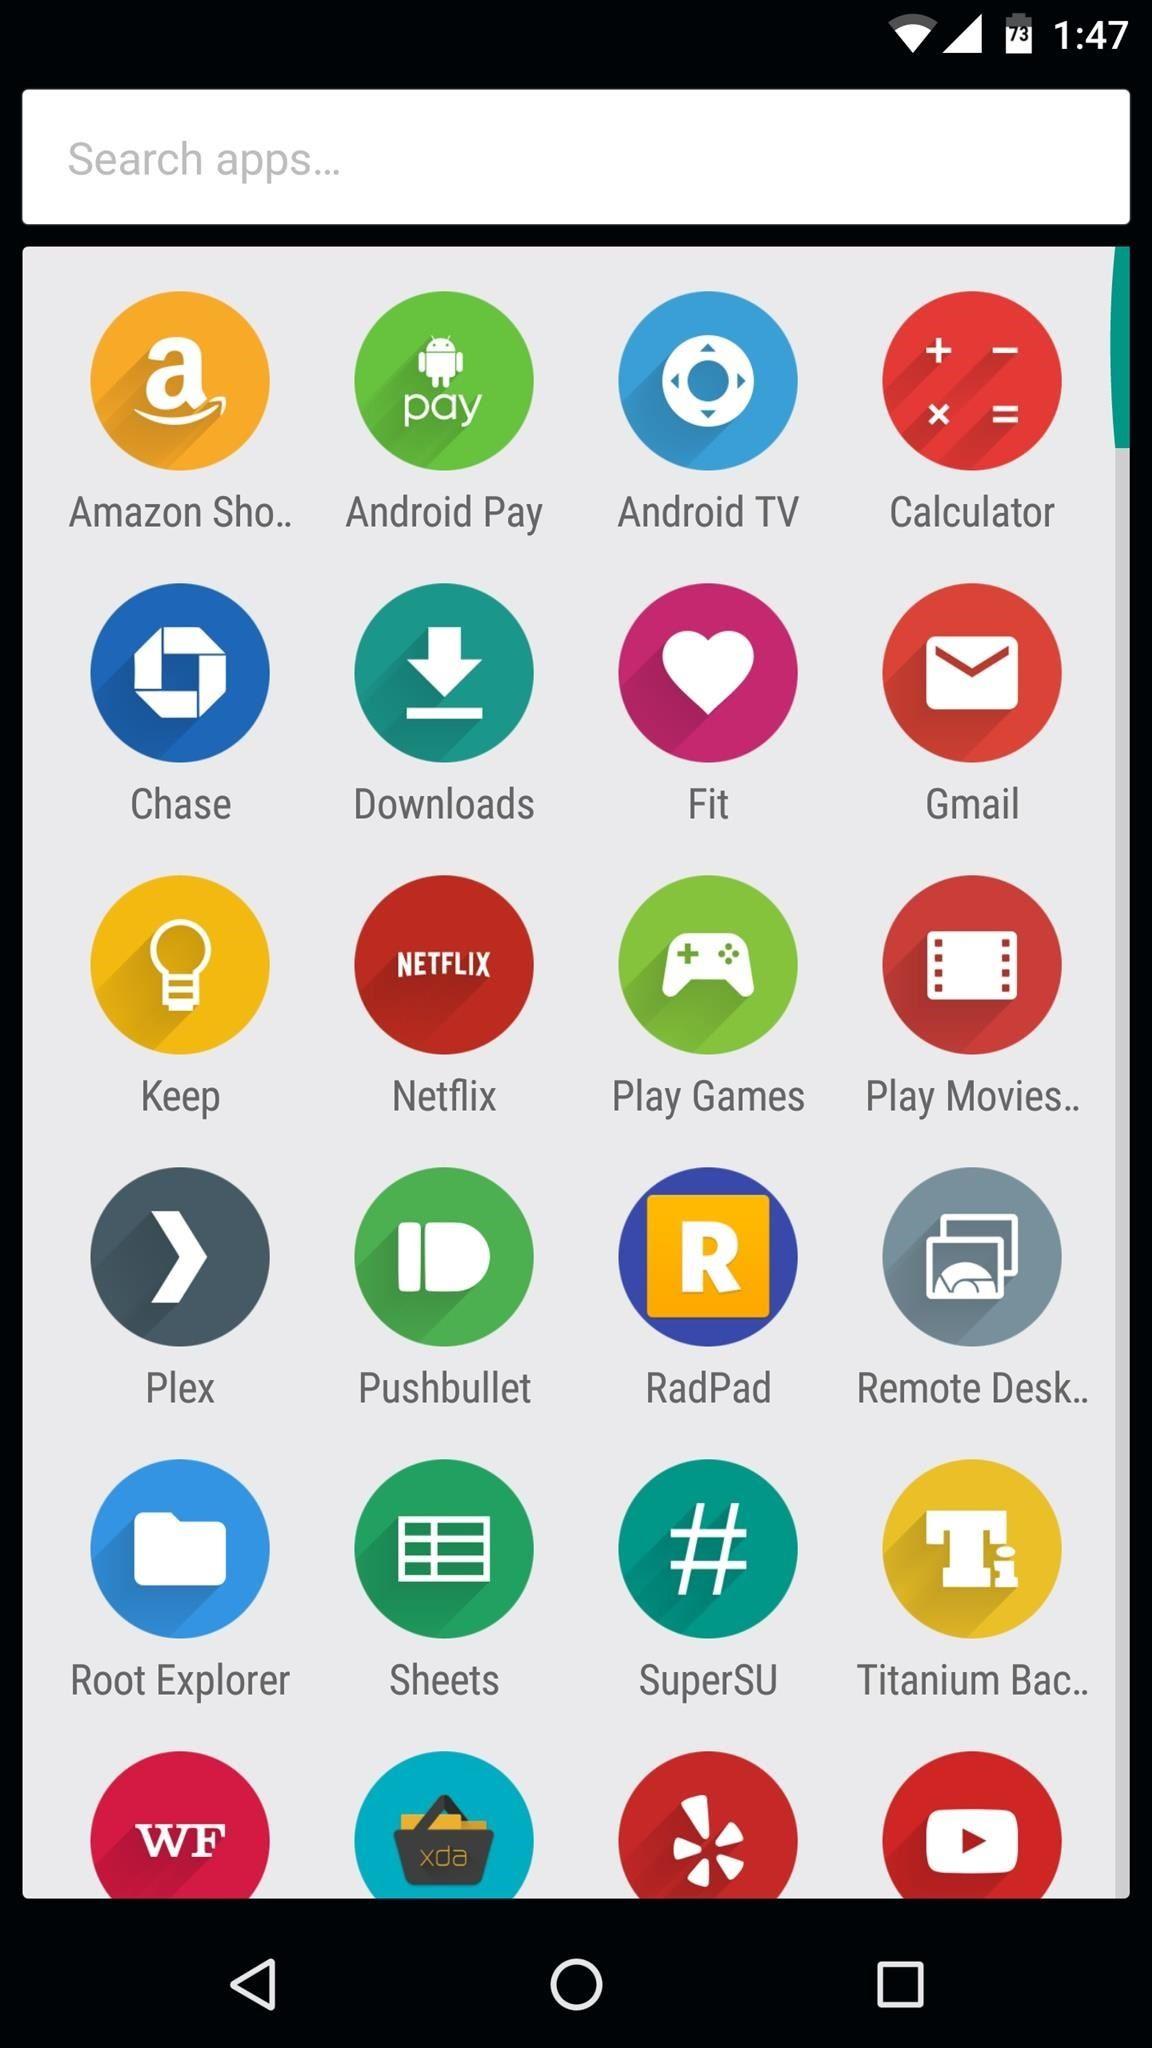 General Mobile App Logo - Free Icon Packs That'll Change the Look & Feel of Your Android